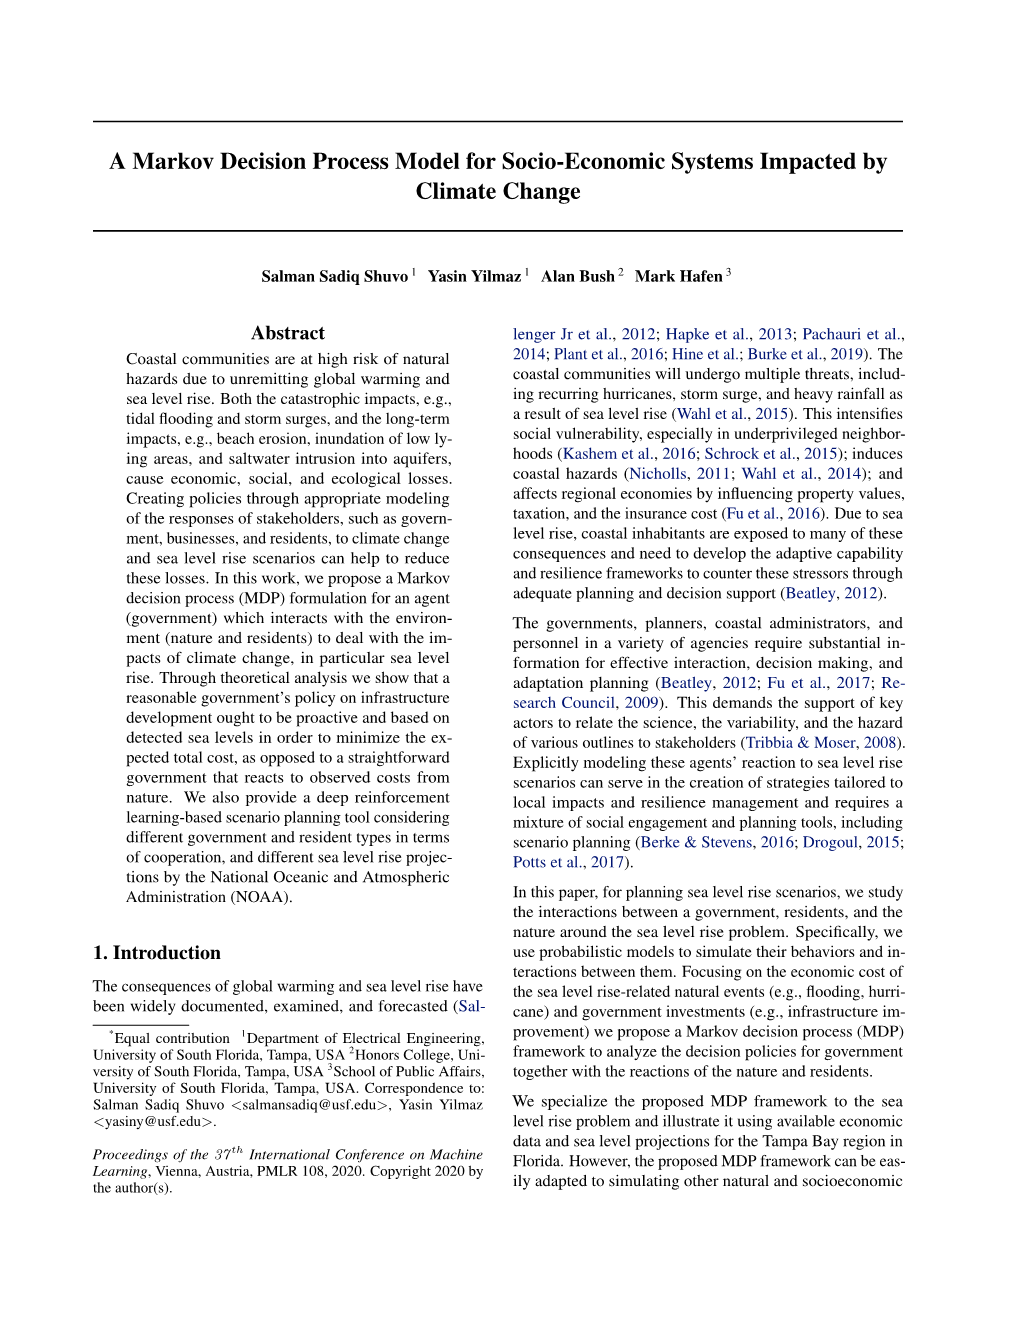 A Markov Decision Process Model for Socio-Economic Systems Impacted by Climate Change